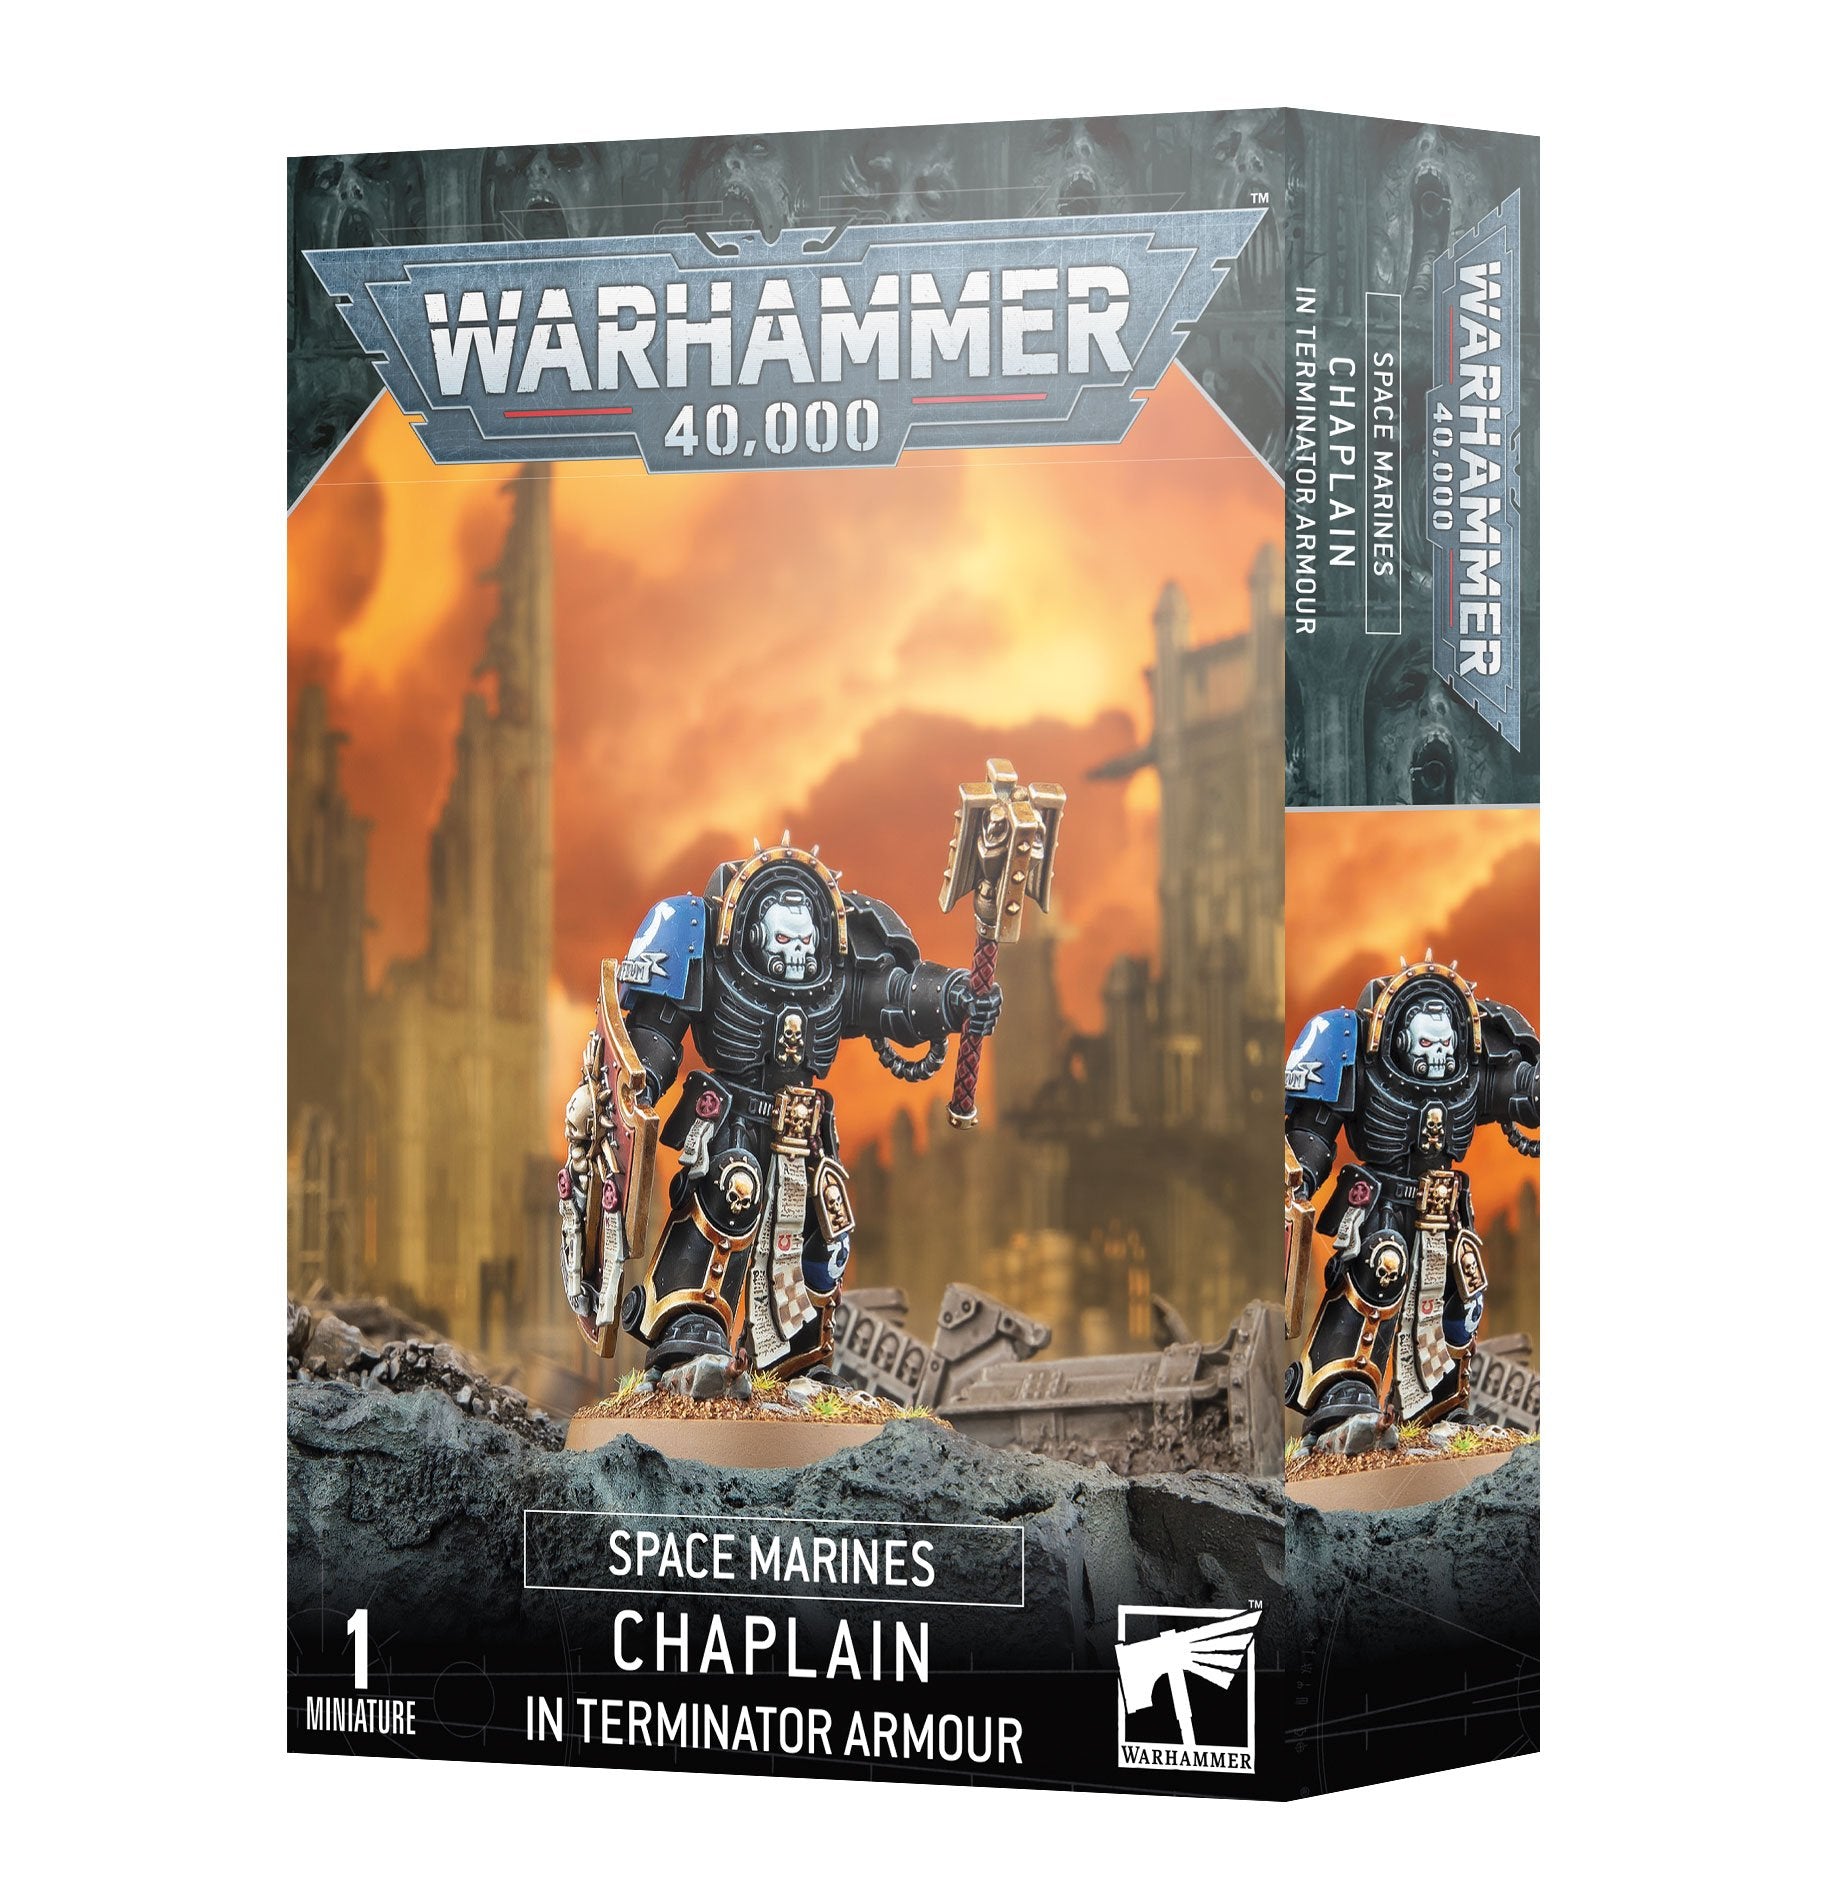 Space Marines: Chaplain in Terminator Armour - Release Date 14/10/23 - Loaded Dice Barry Vale of Glamorgan CF64 3HD